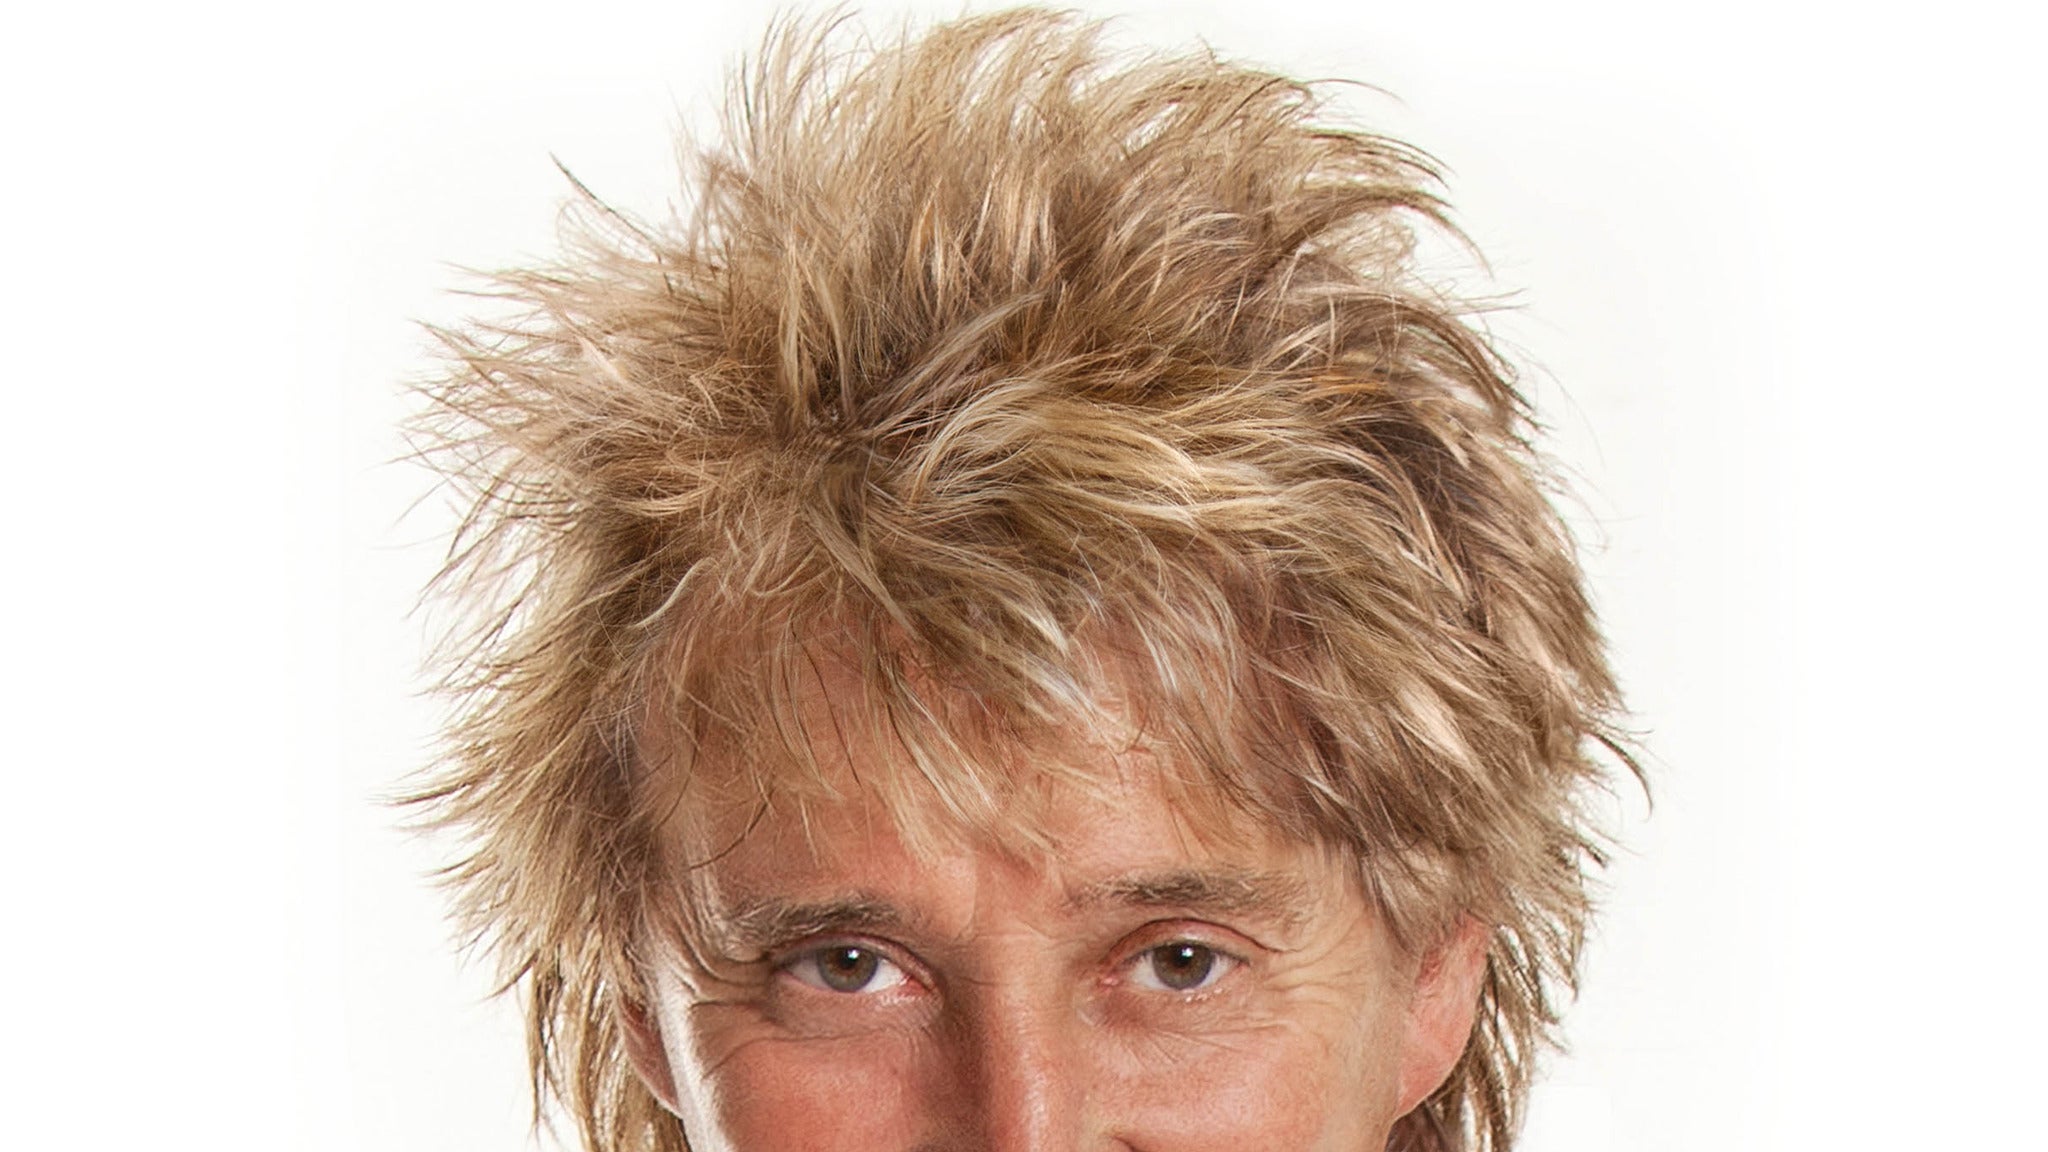 Rod Stewart with special guest Cheap Trick presale code for early tickets in Saint Paul